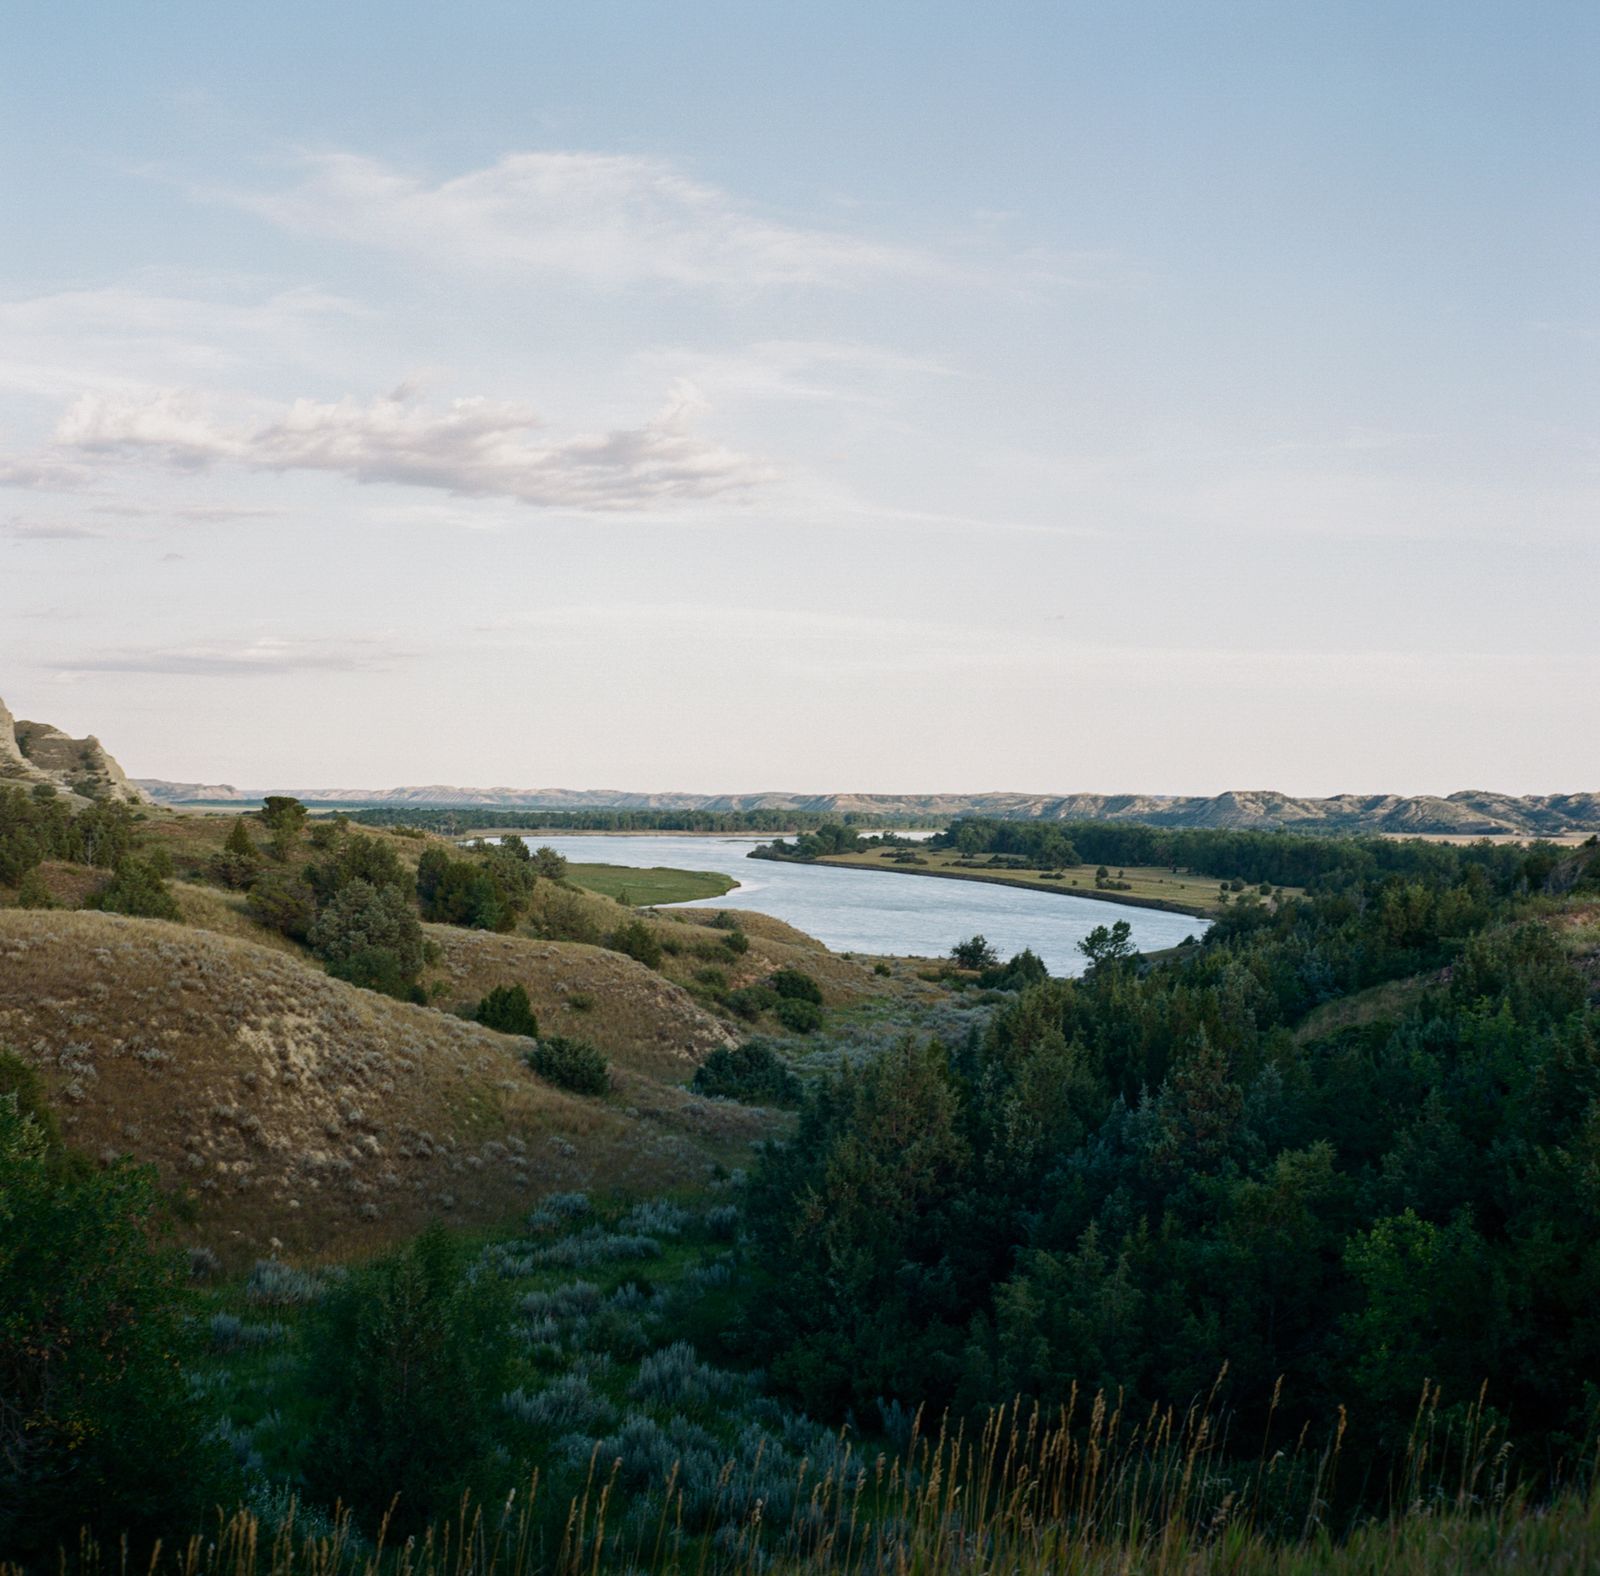 © Sara Hylton - Image from the The True Cost of Big Oil in Indian Country photography project